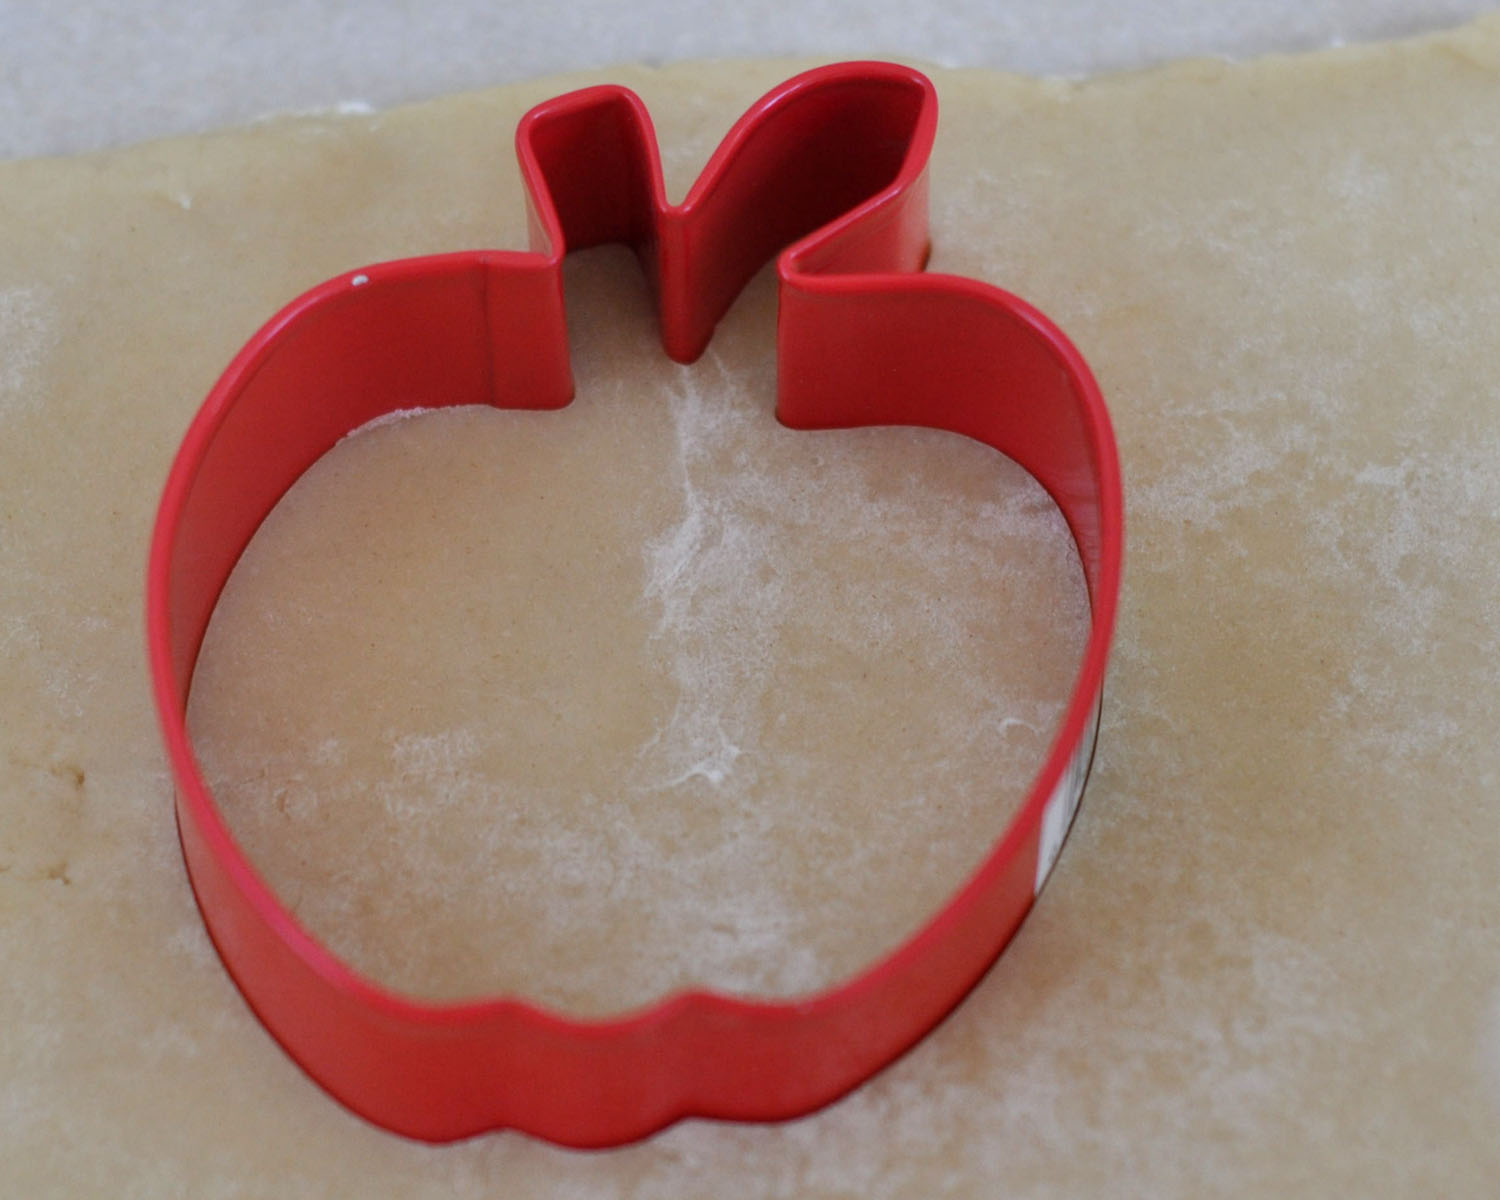 Apple Shaped Cookie Cutter on Raw Cookie Dough Stock Photo Image of